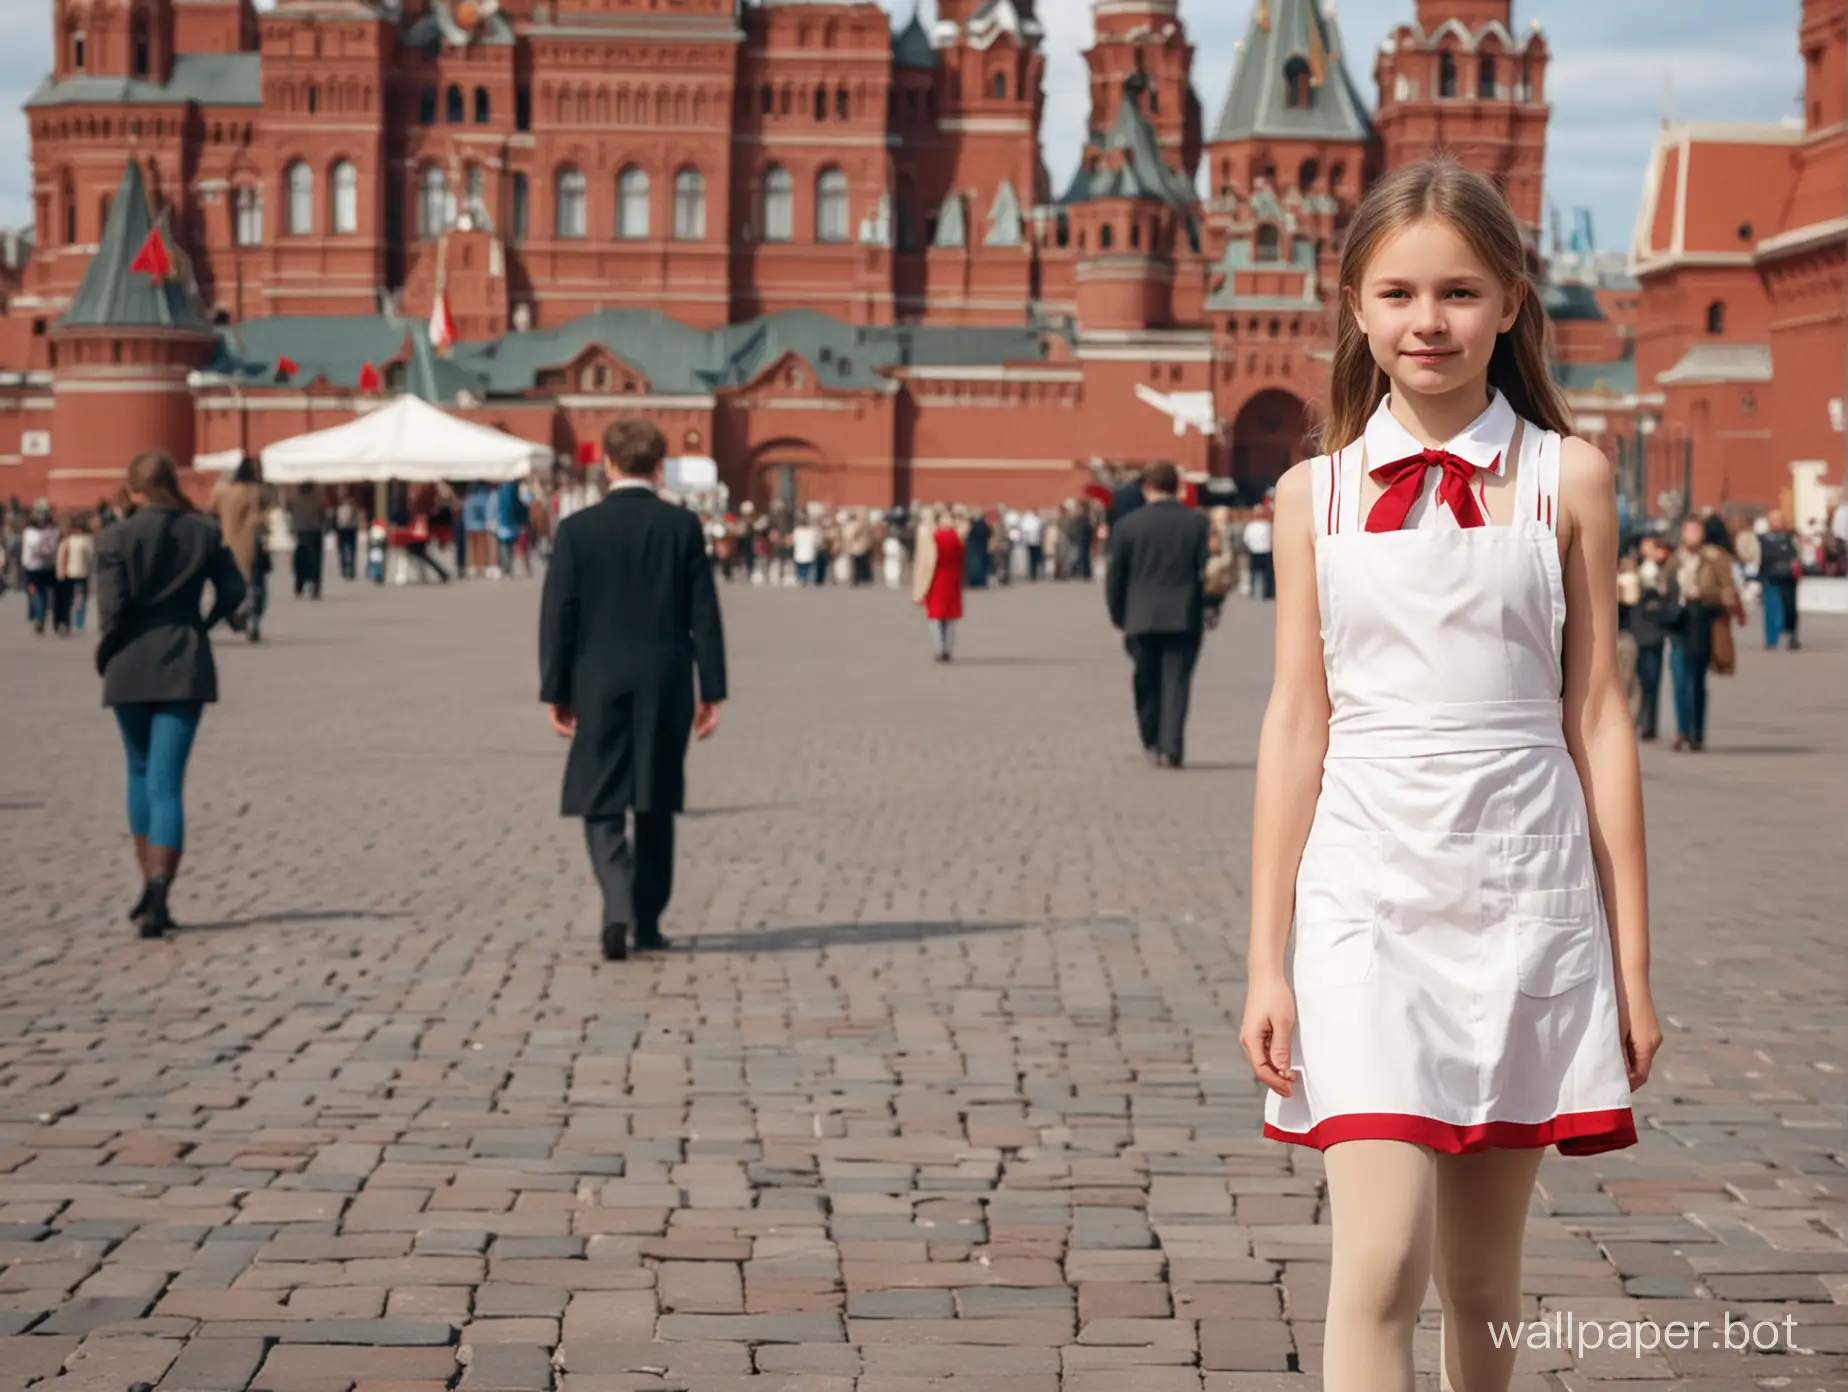 11YearOld-Soviet-Girl-in-Traditional-Dress-Embraces-Red-Squares-Historic-Ambiance